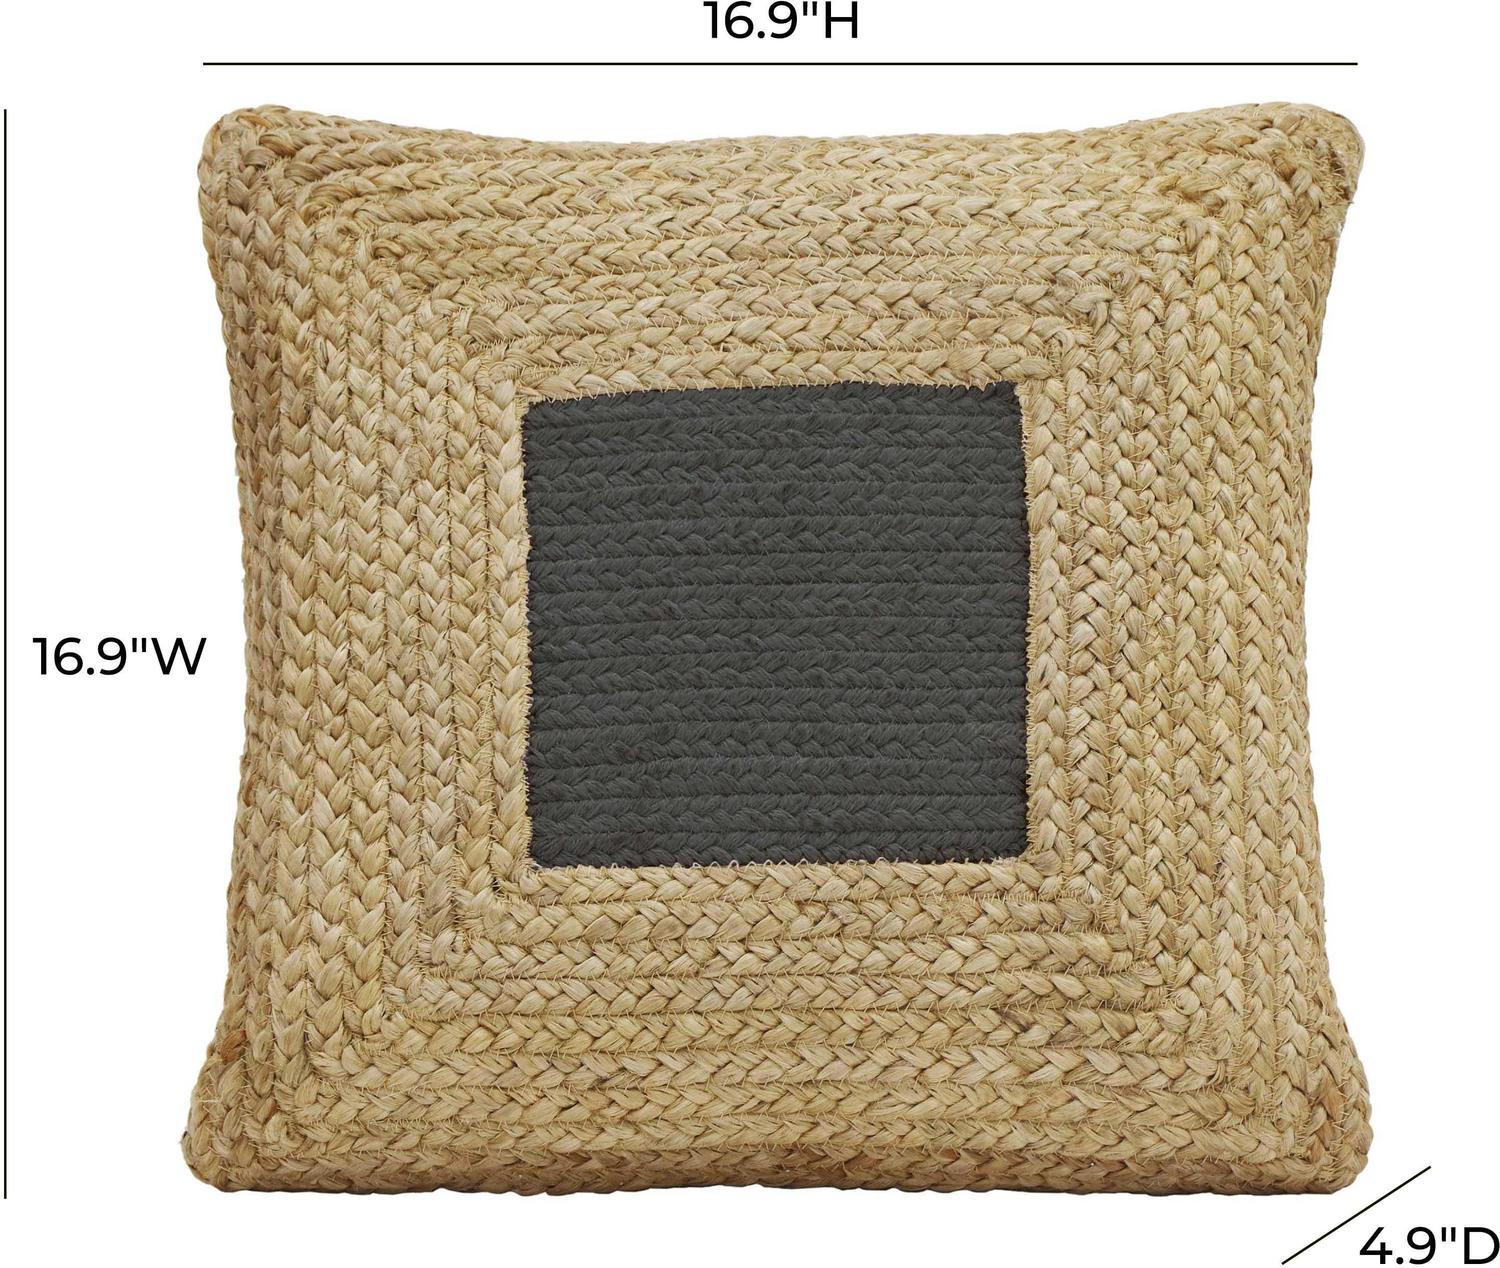 cute pillows for bed Contemporary Design Furniture Pillows Black,Natural